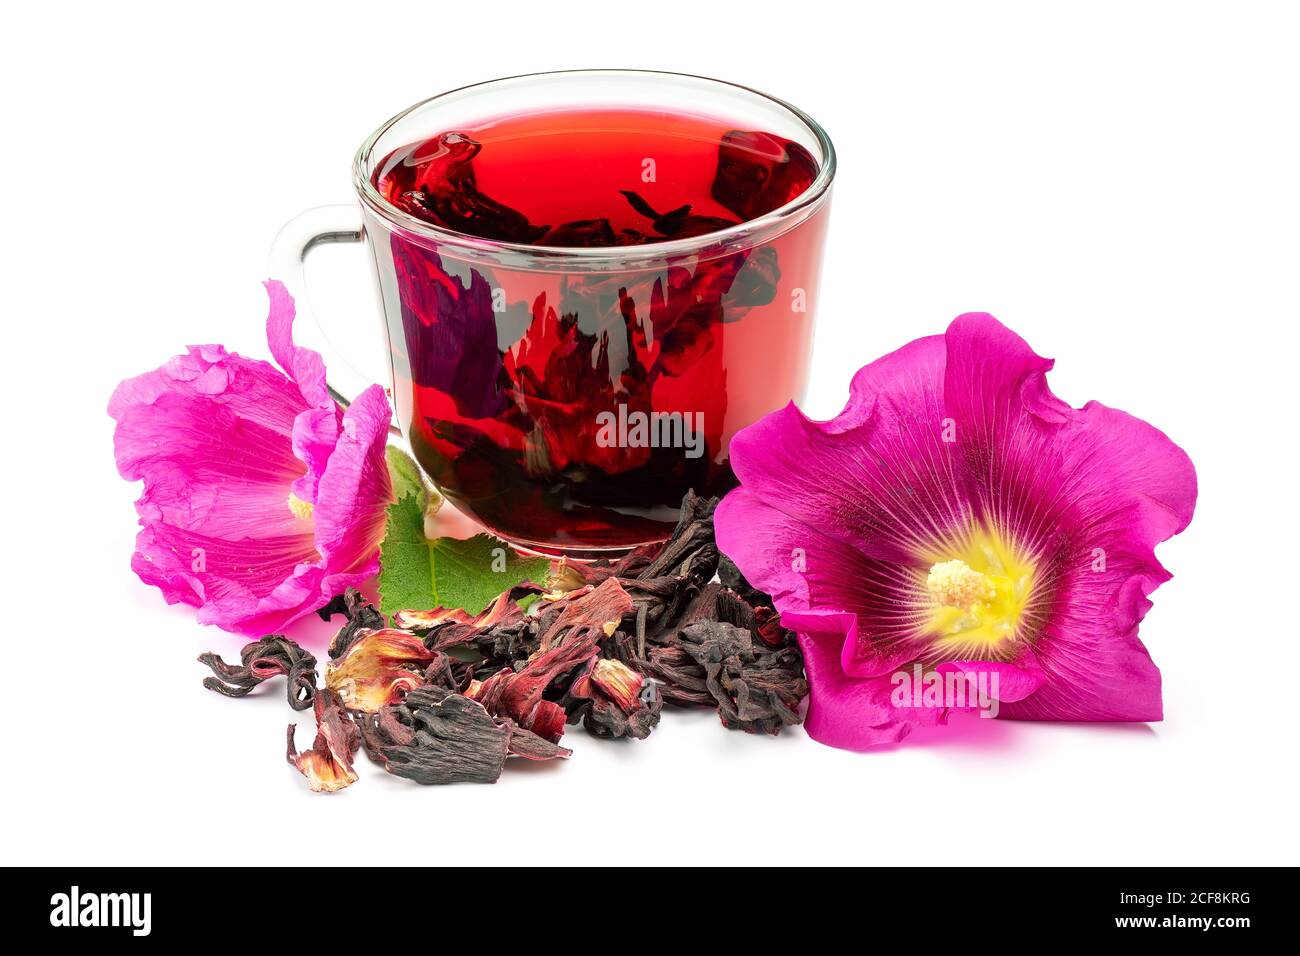 Hibiscus or mallow herbal tea. Hibiscus tea, flower and dry blossom isolated on white background. Stock Photo